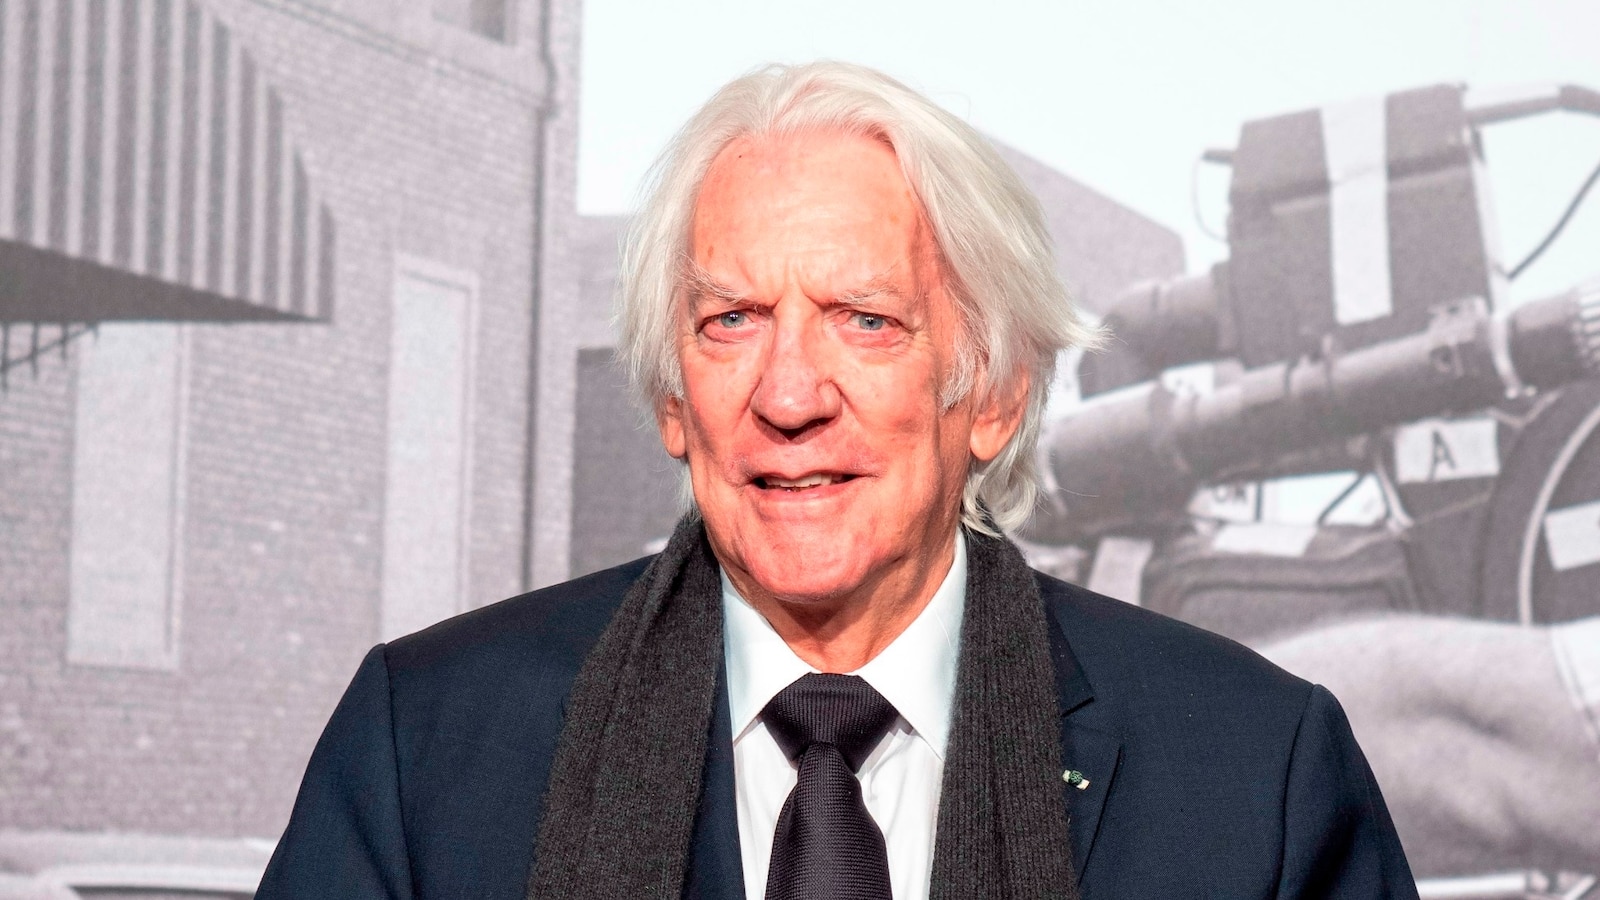 Donald Sutherland, veteran actor and father of Kiefer Sutherland, dead at 88